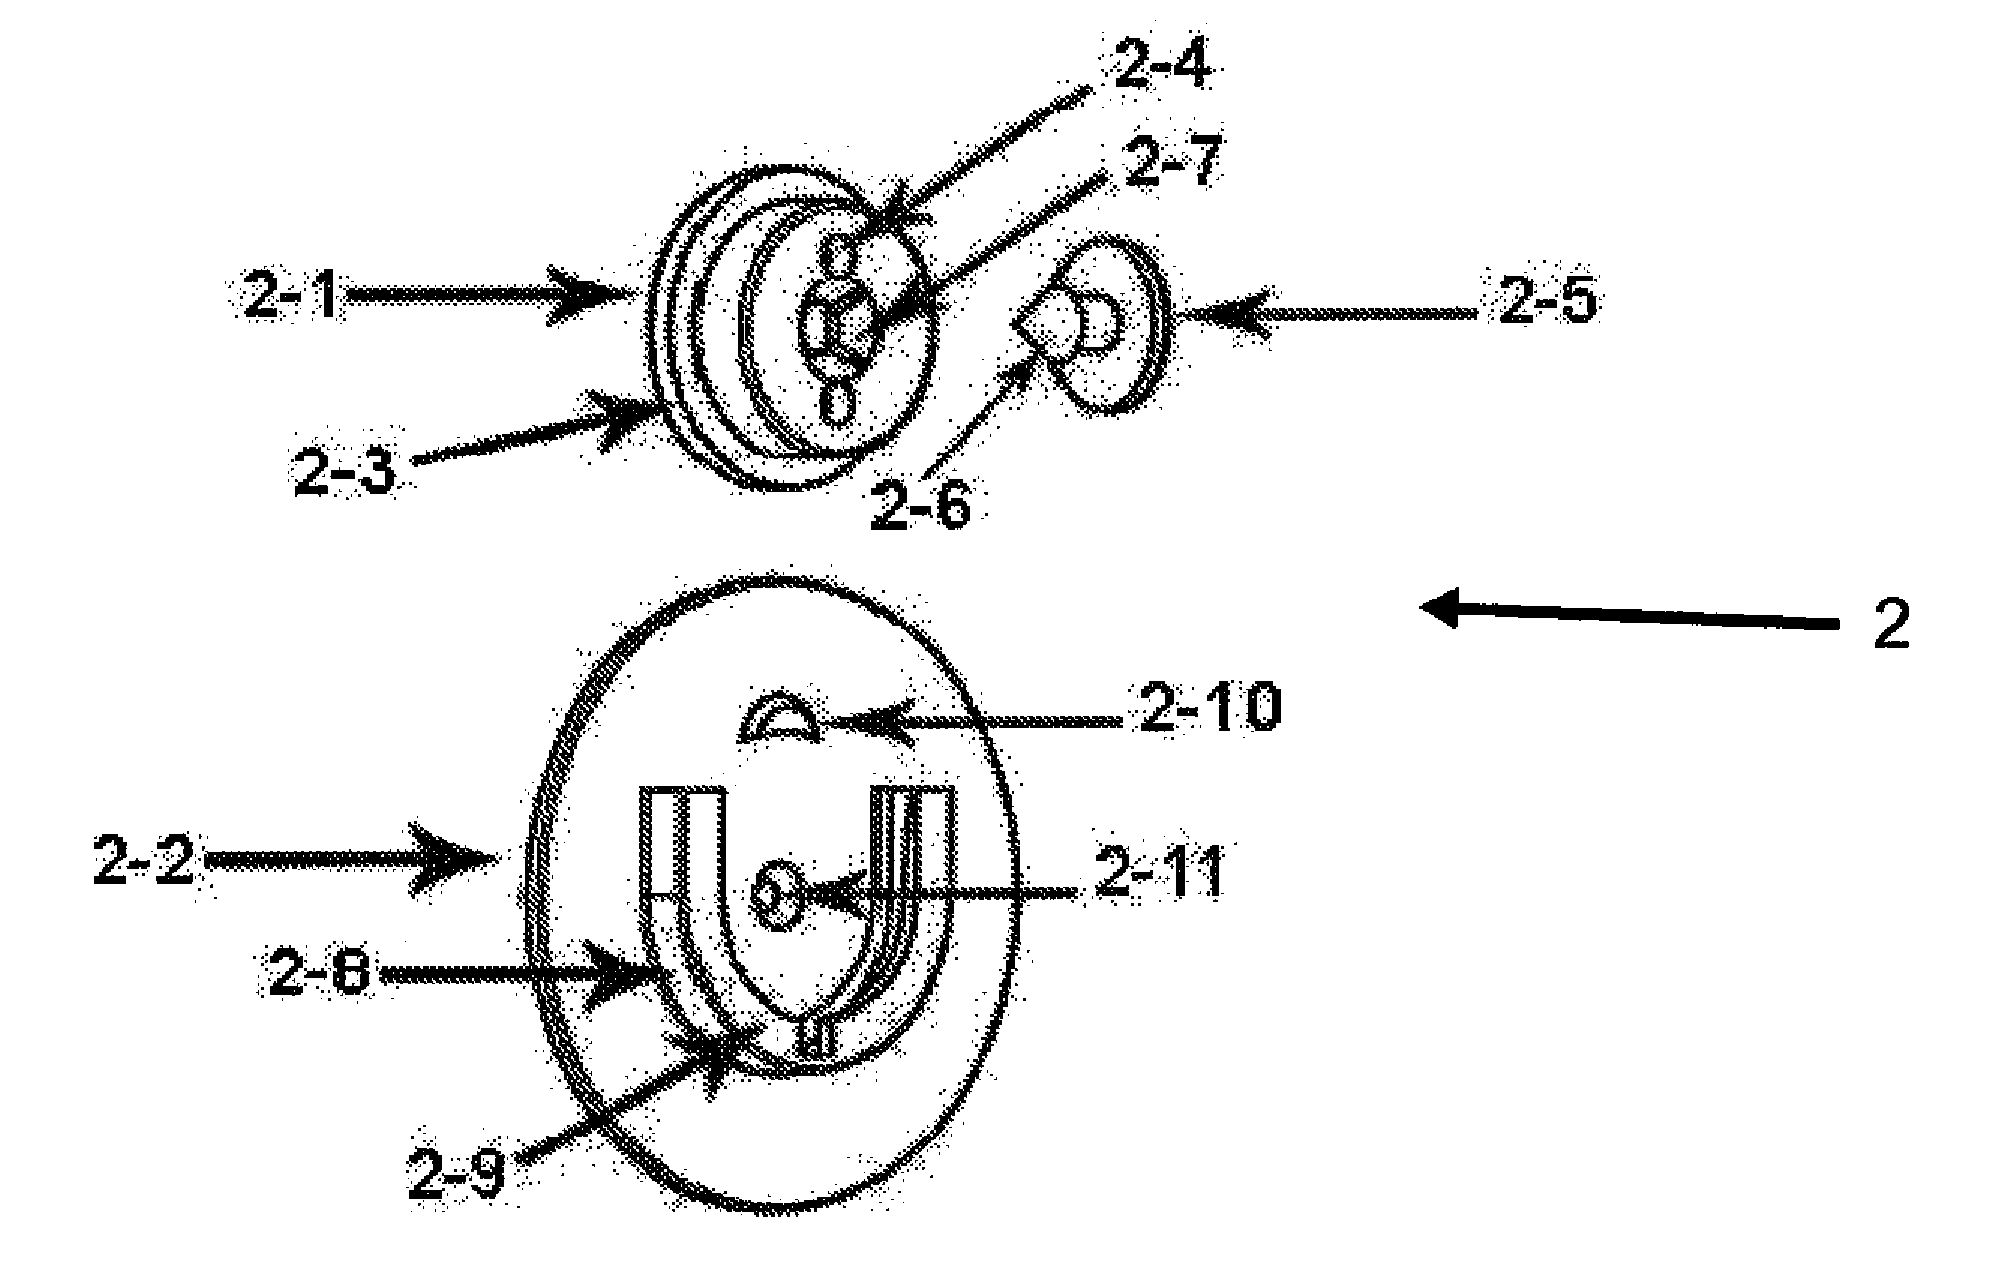 System for releasably attaching an article of clothing to a body